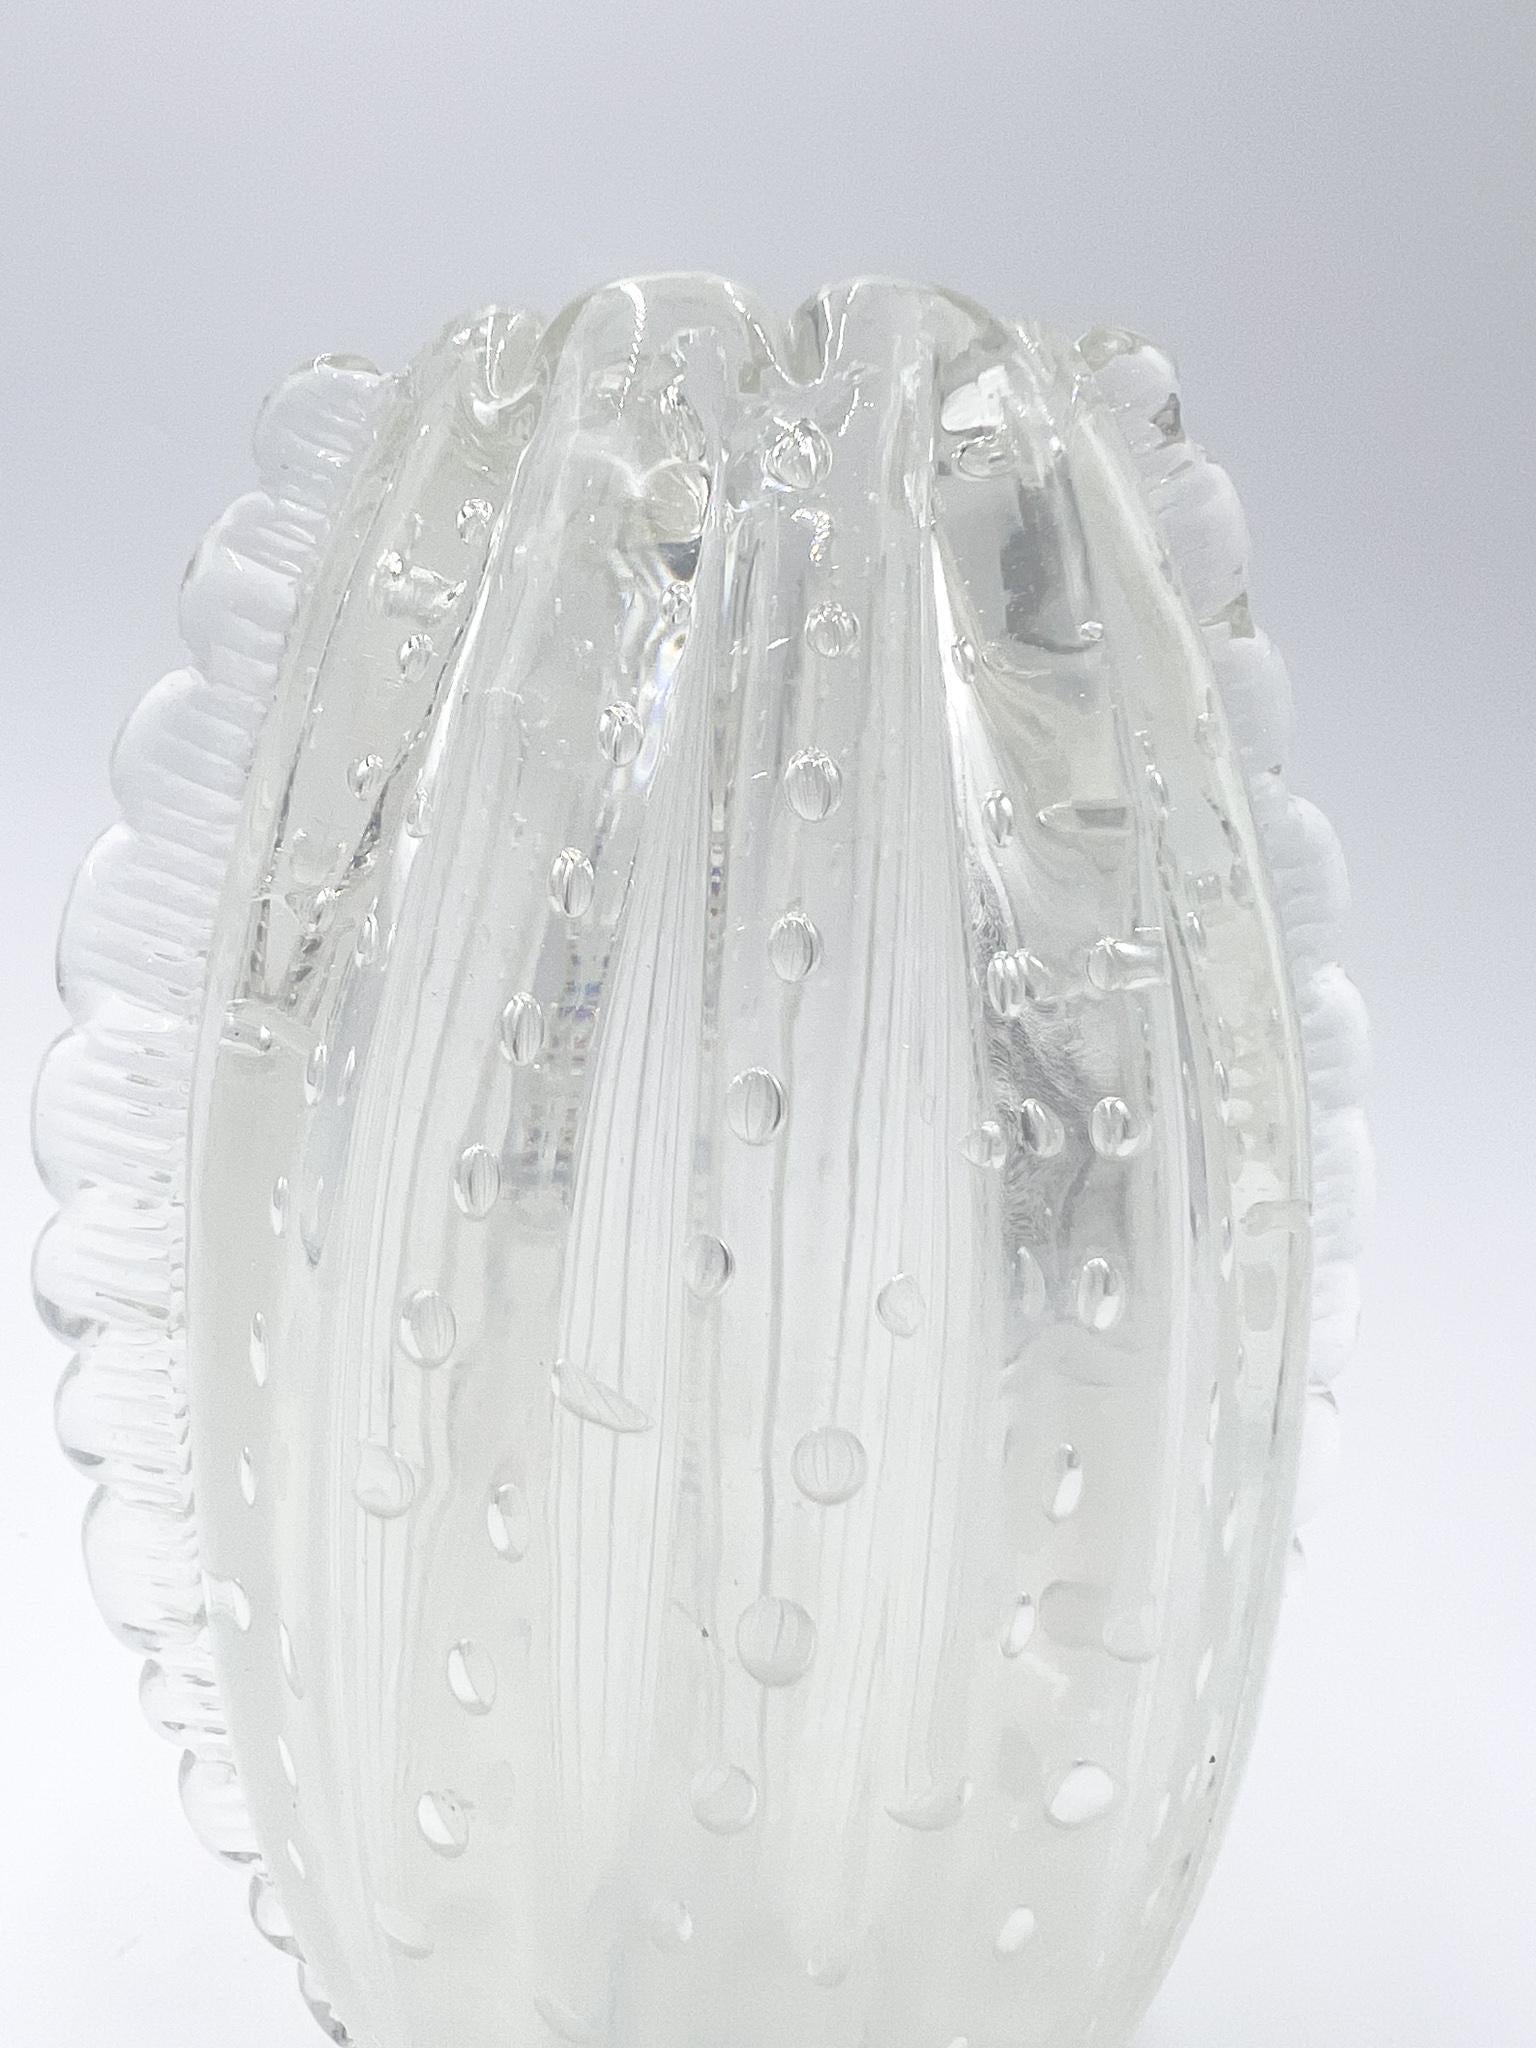 Transparent Murano glass vase with bubble processing, made by Barovier in the 1960s

Ø 13 cm h 20 cm

Barovier & Toso is a glass factory, known for its handcrafted collections of decorative Murano glass in the 20th century. The chemical